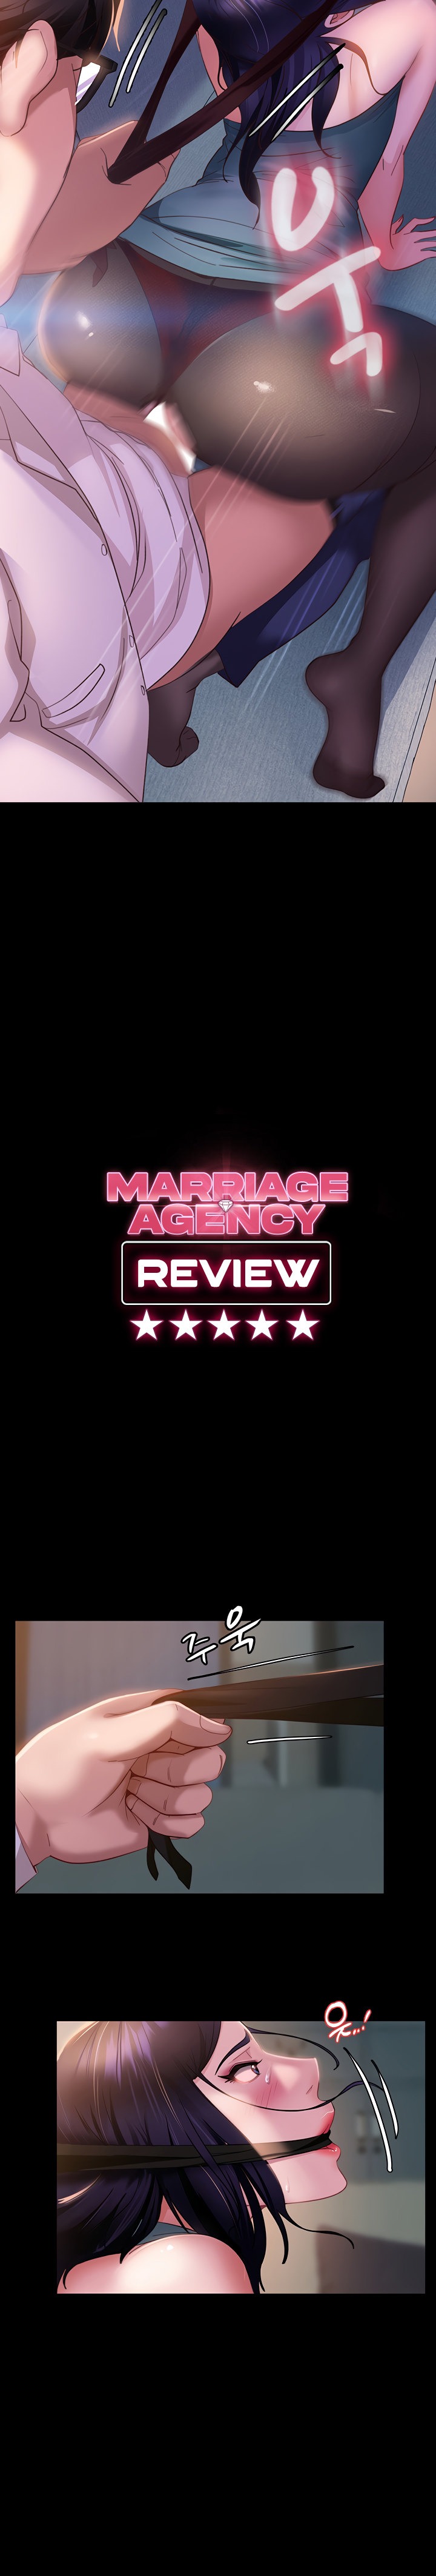 Marriage Agency Review - Chapter 12 Page 3